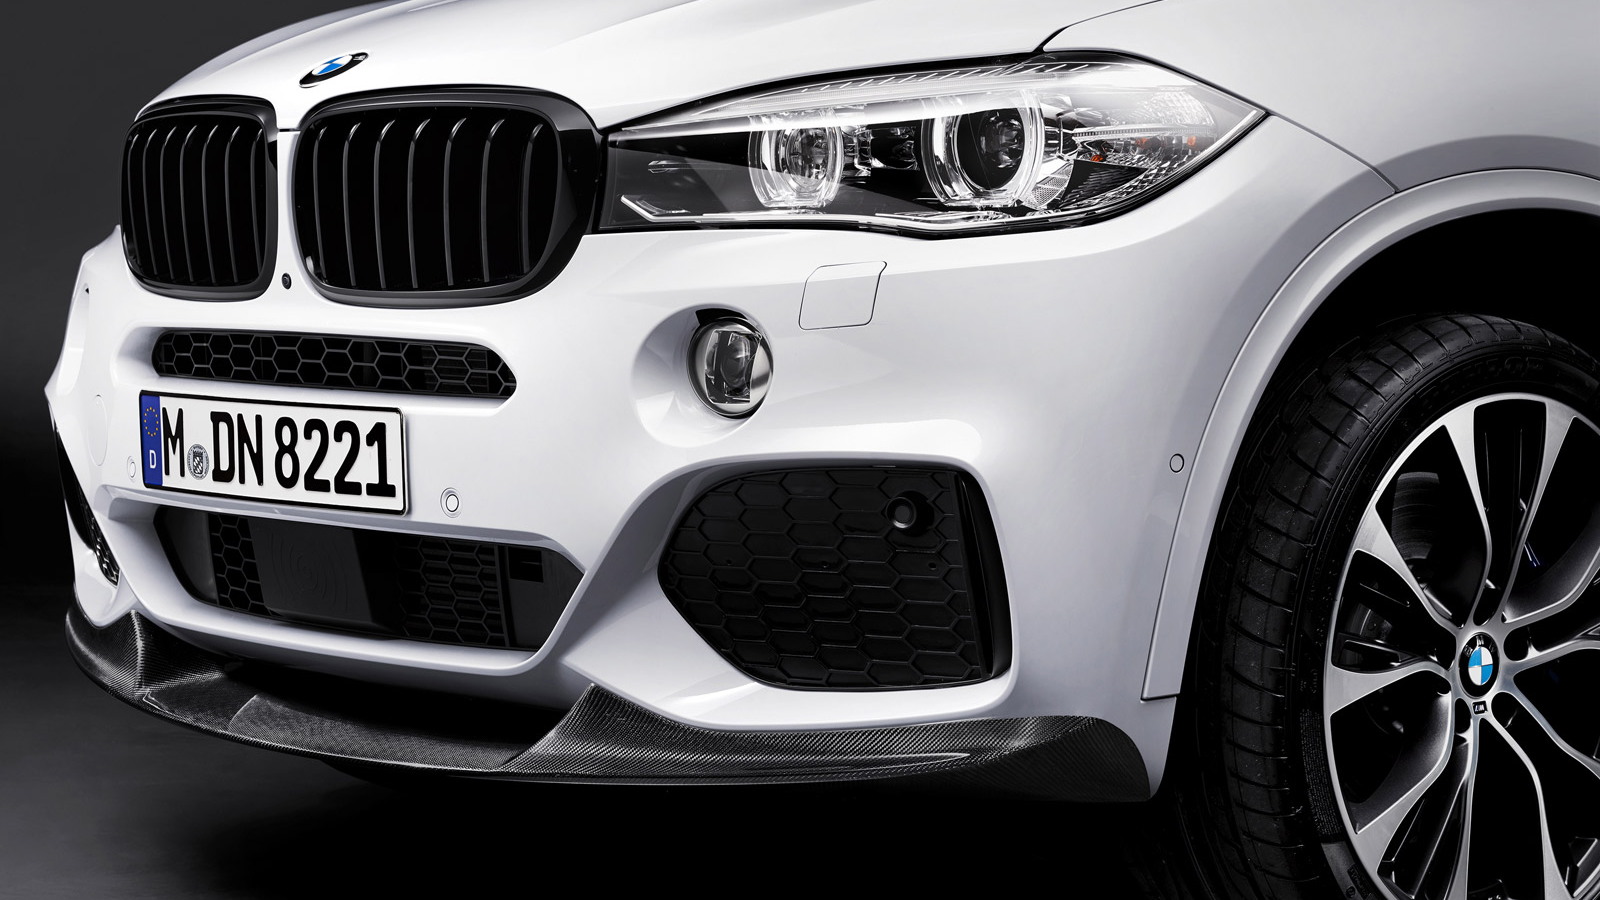 2014 BMW X5 equipped with M Performance parts